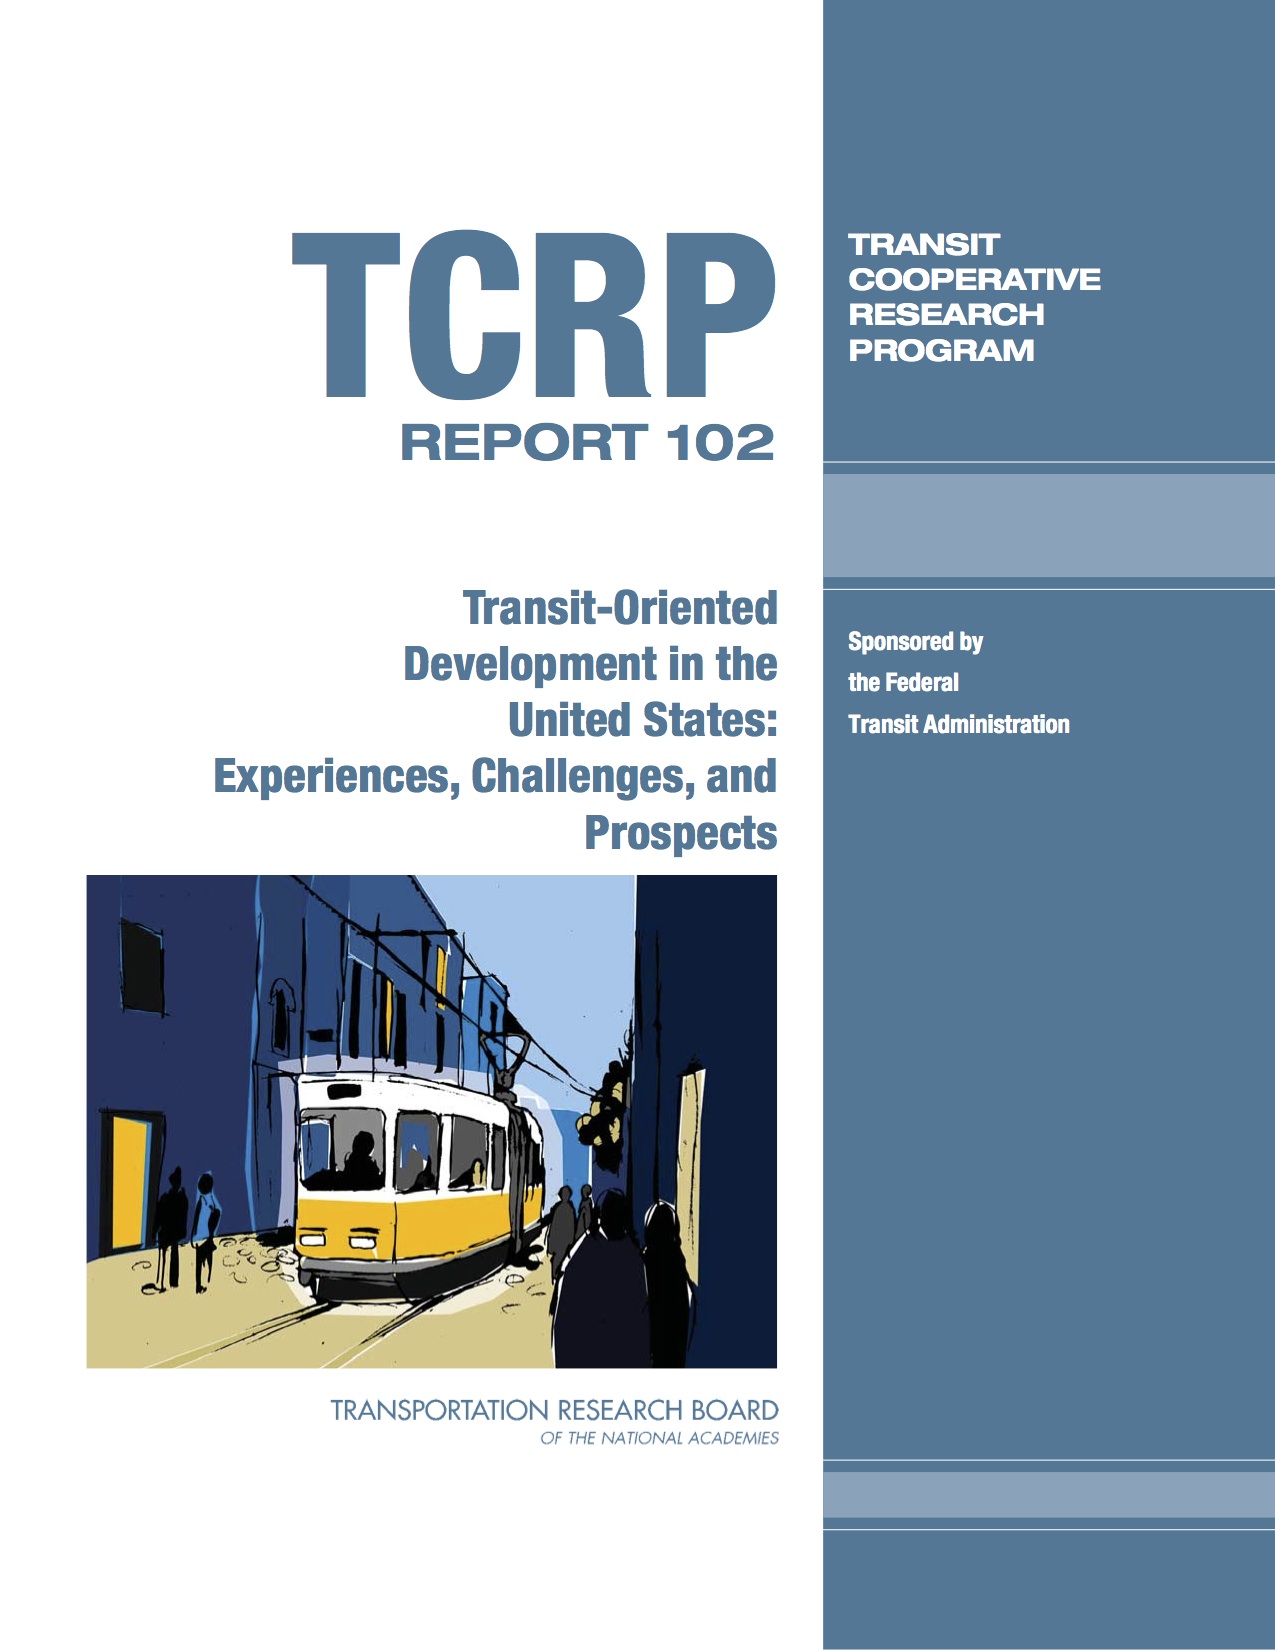 Transit-Oriented Development in the United States: Experiences, Challenges, and Prospects